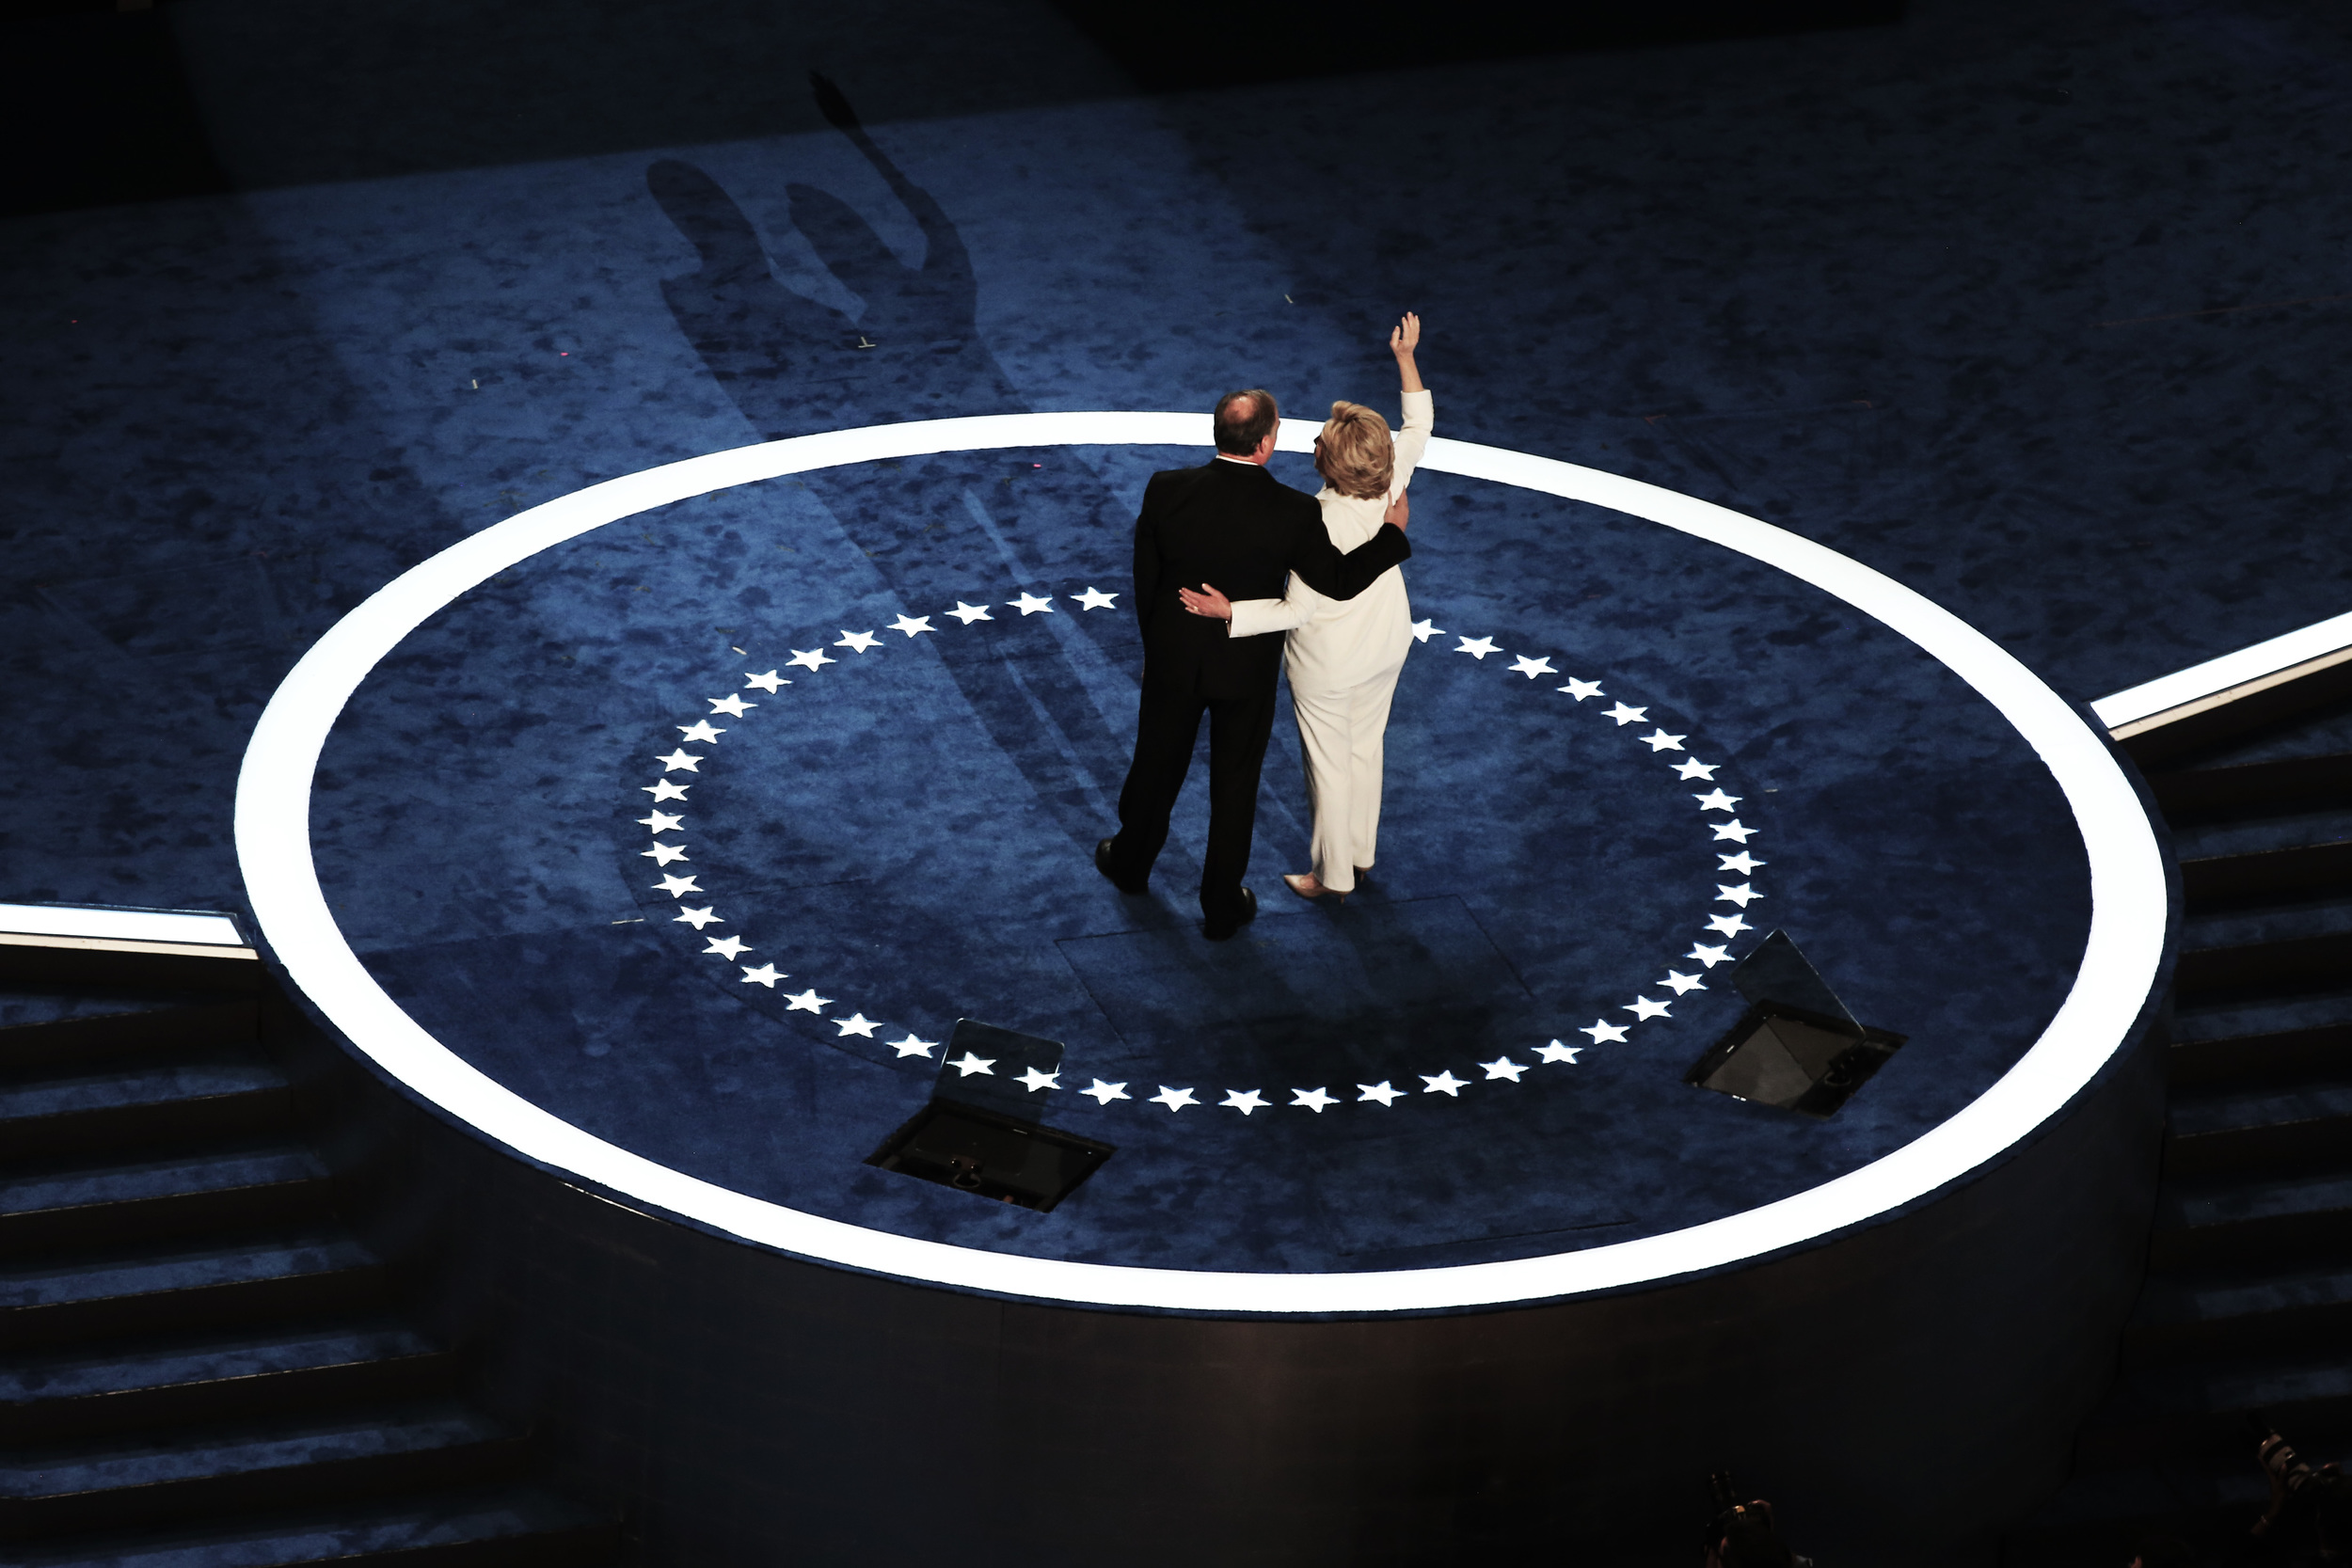  Democratic nominee Hillary Clinton and her running mate Tim Kaine wave to photographers on stage at the Democratic National Convention in Philadelphia after Clinton became the first woman to accept a major political party's nomination for President 